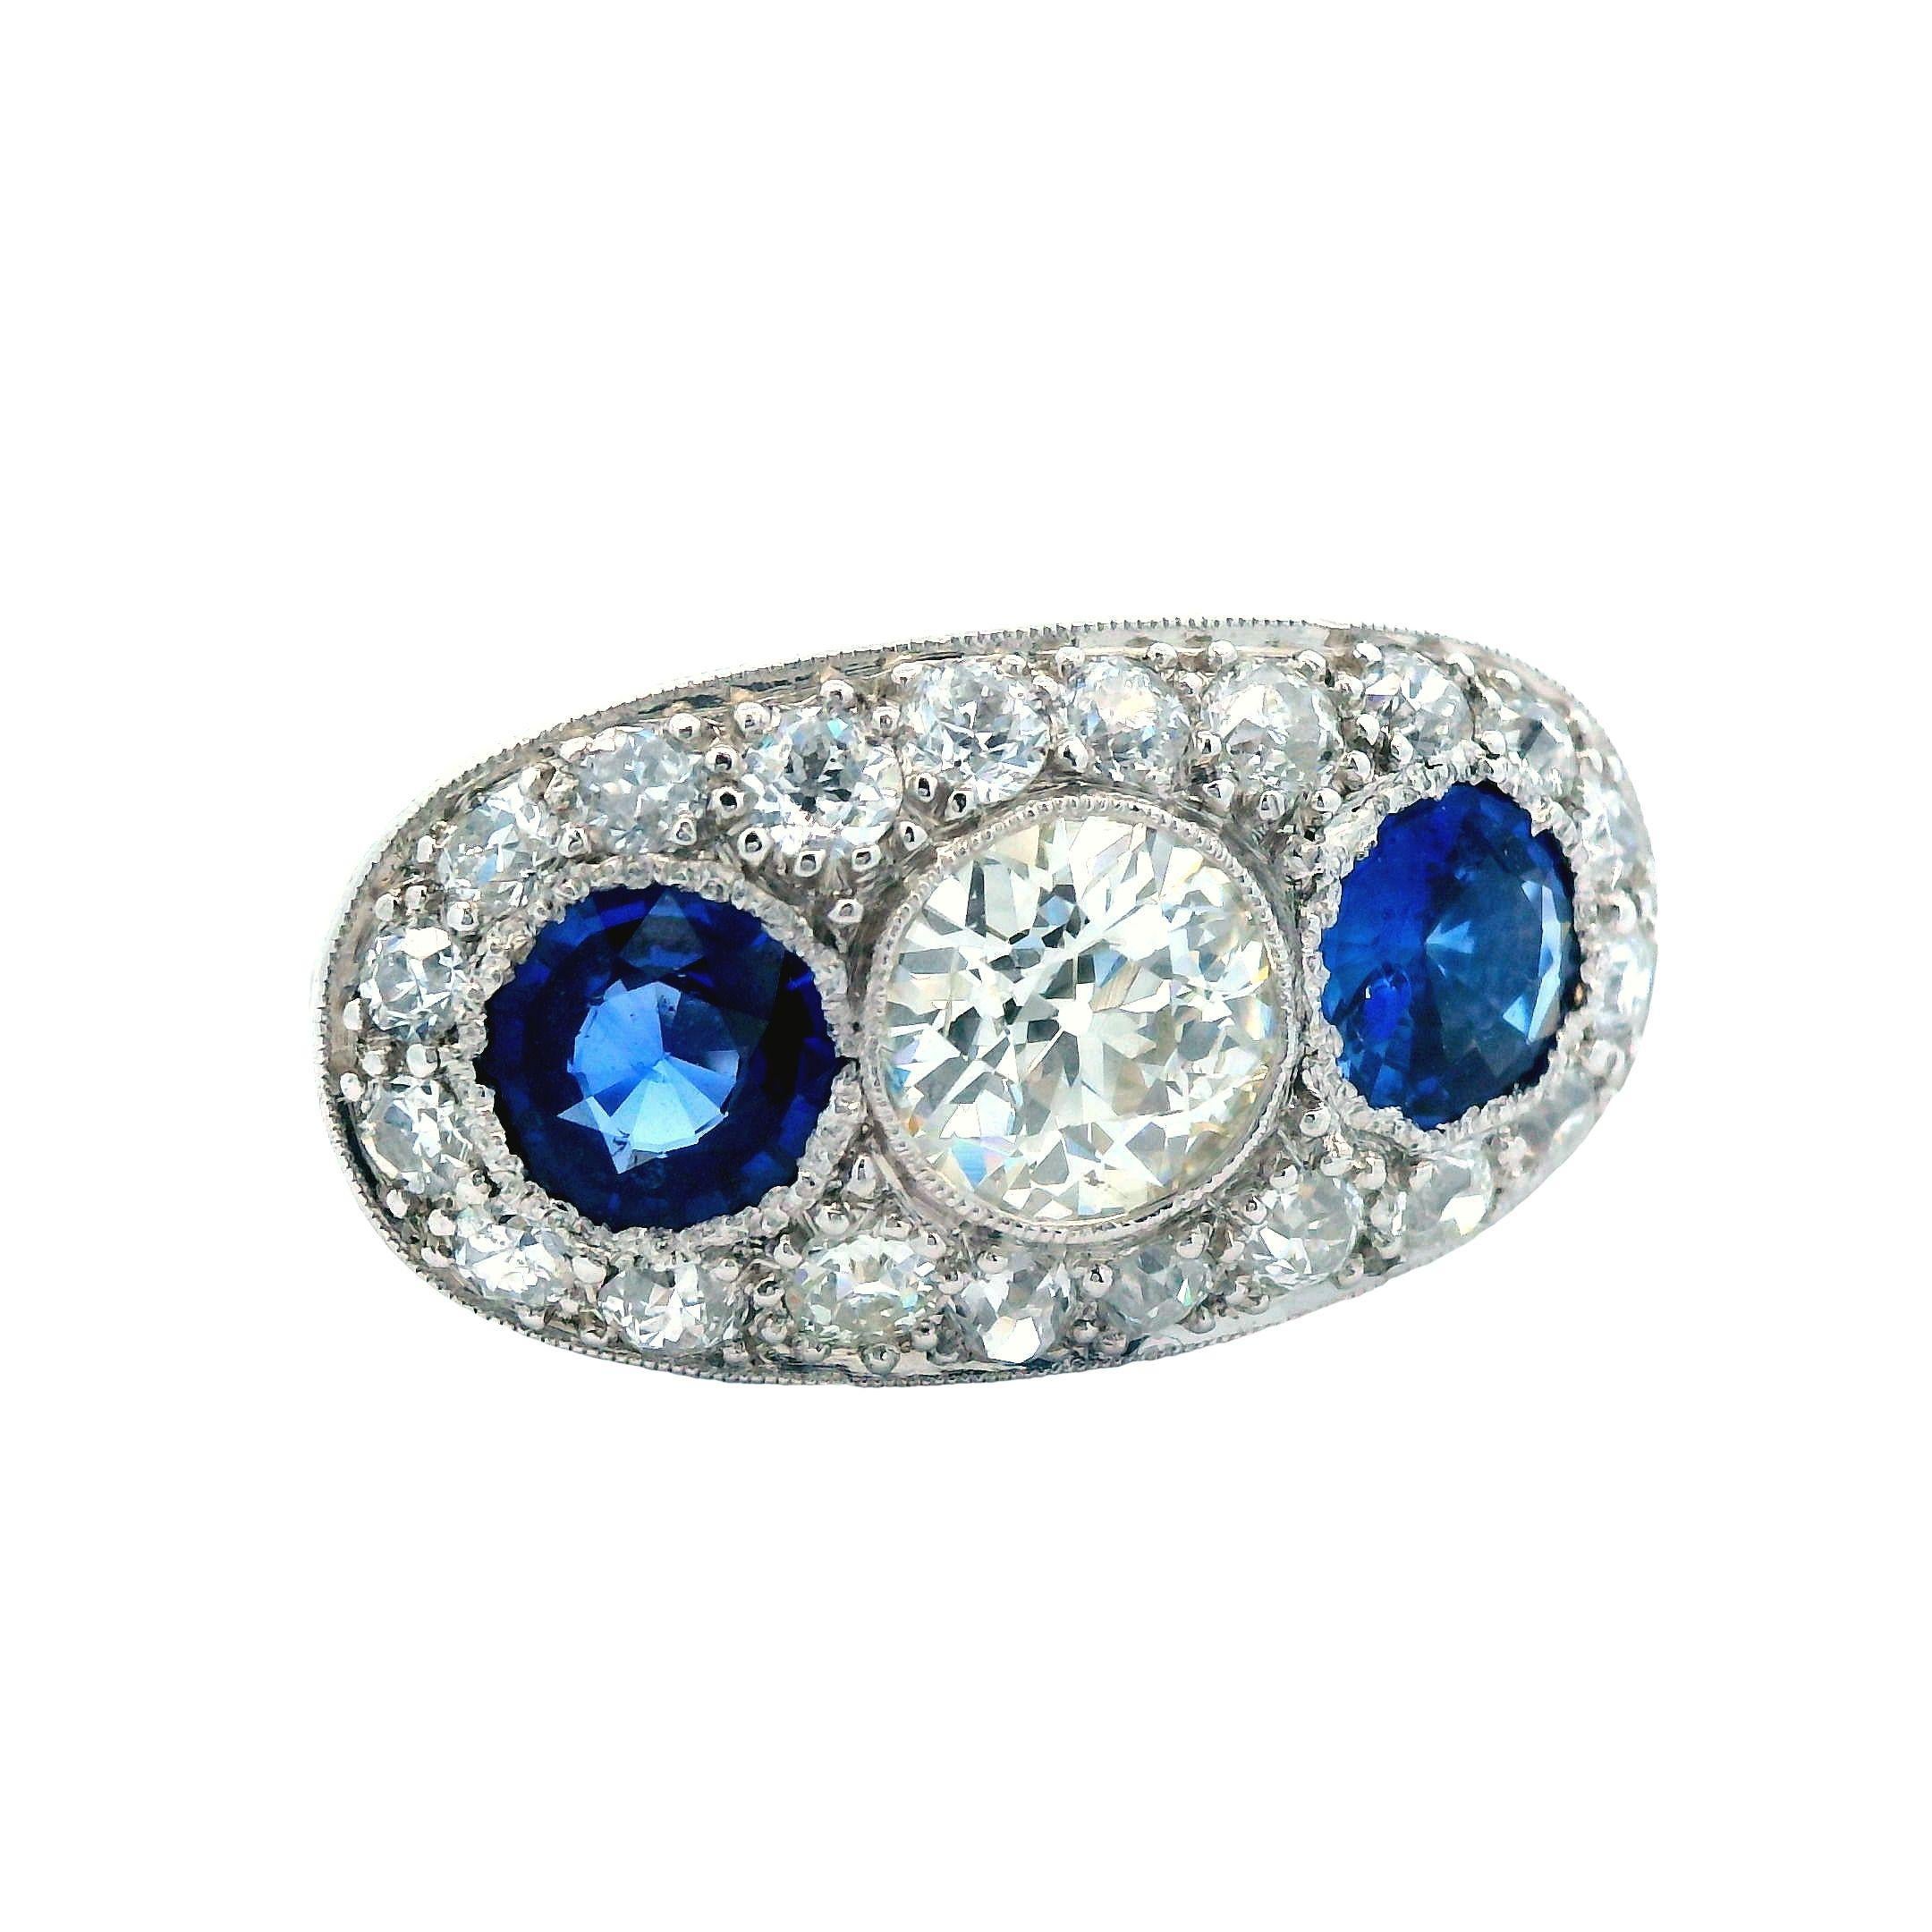 This is a classic three stone ring made in platinum with diamond and blue sapphires. This ring is very sophisticated due to the size and quality of stones used in this three stone design. The center of this ring boast a sparkly white firey .60